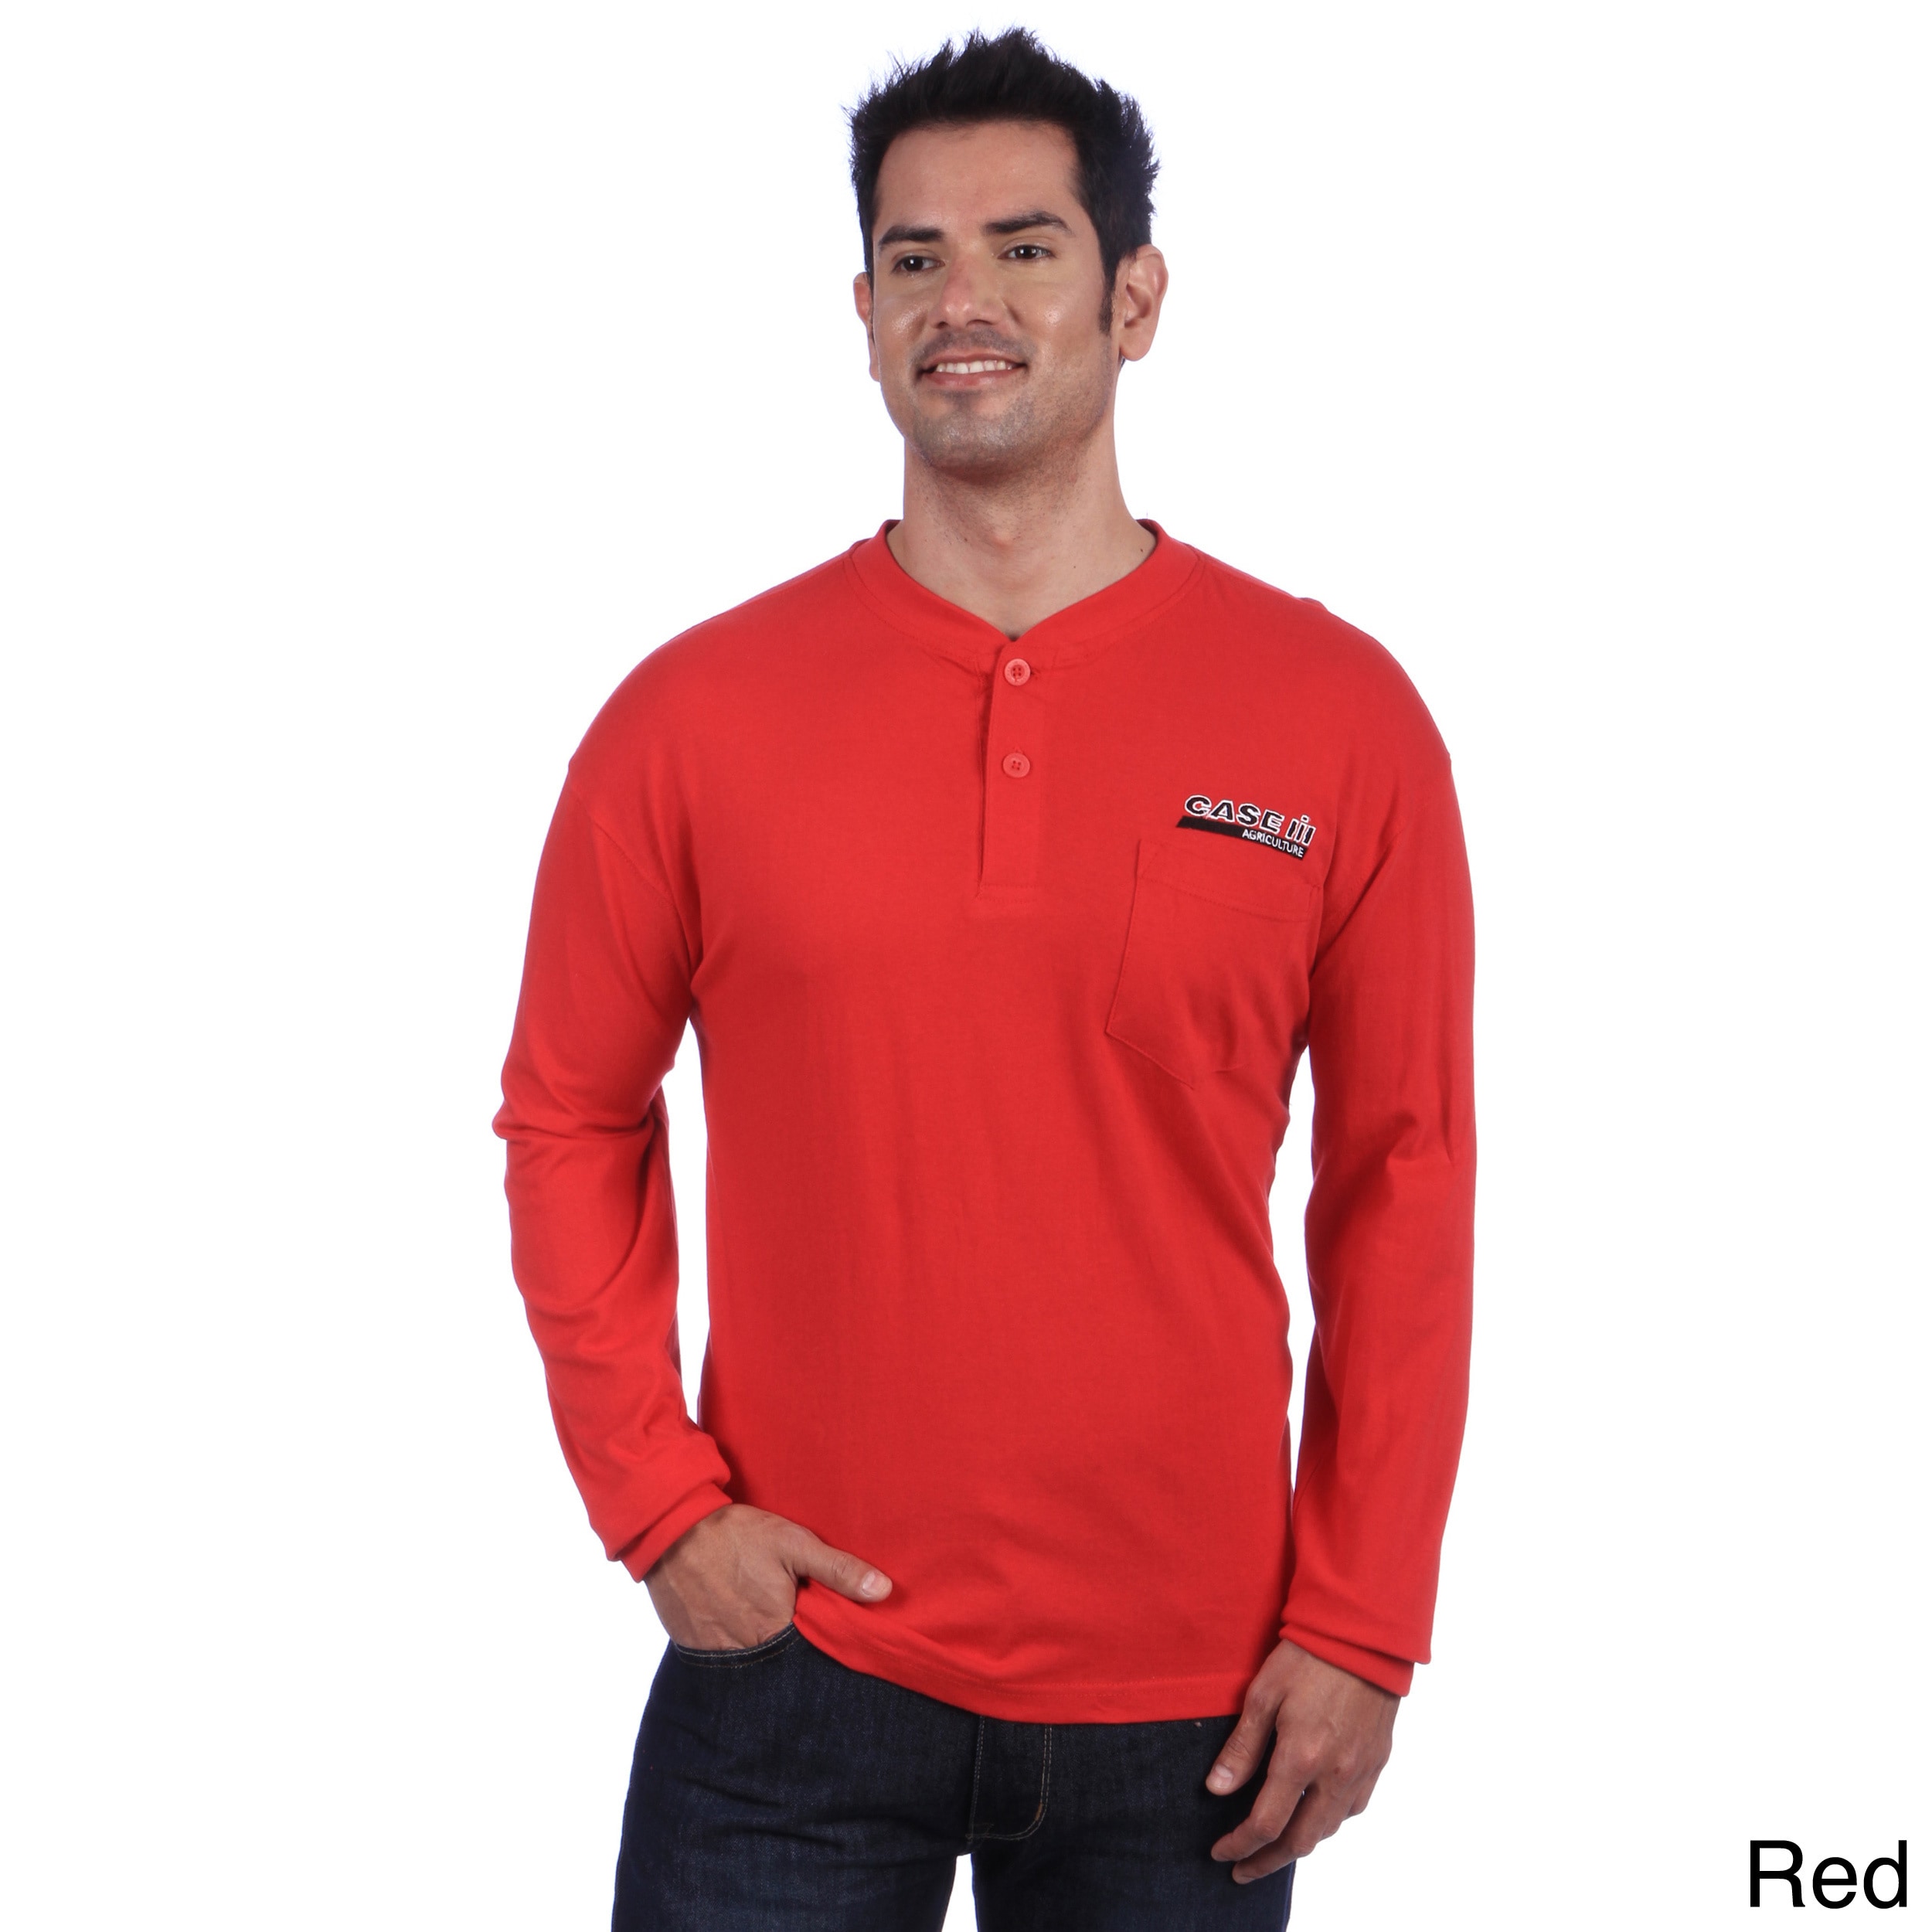 Case Ih Mens Embroidered Knit Henley